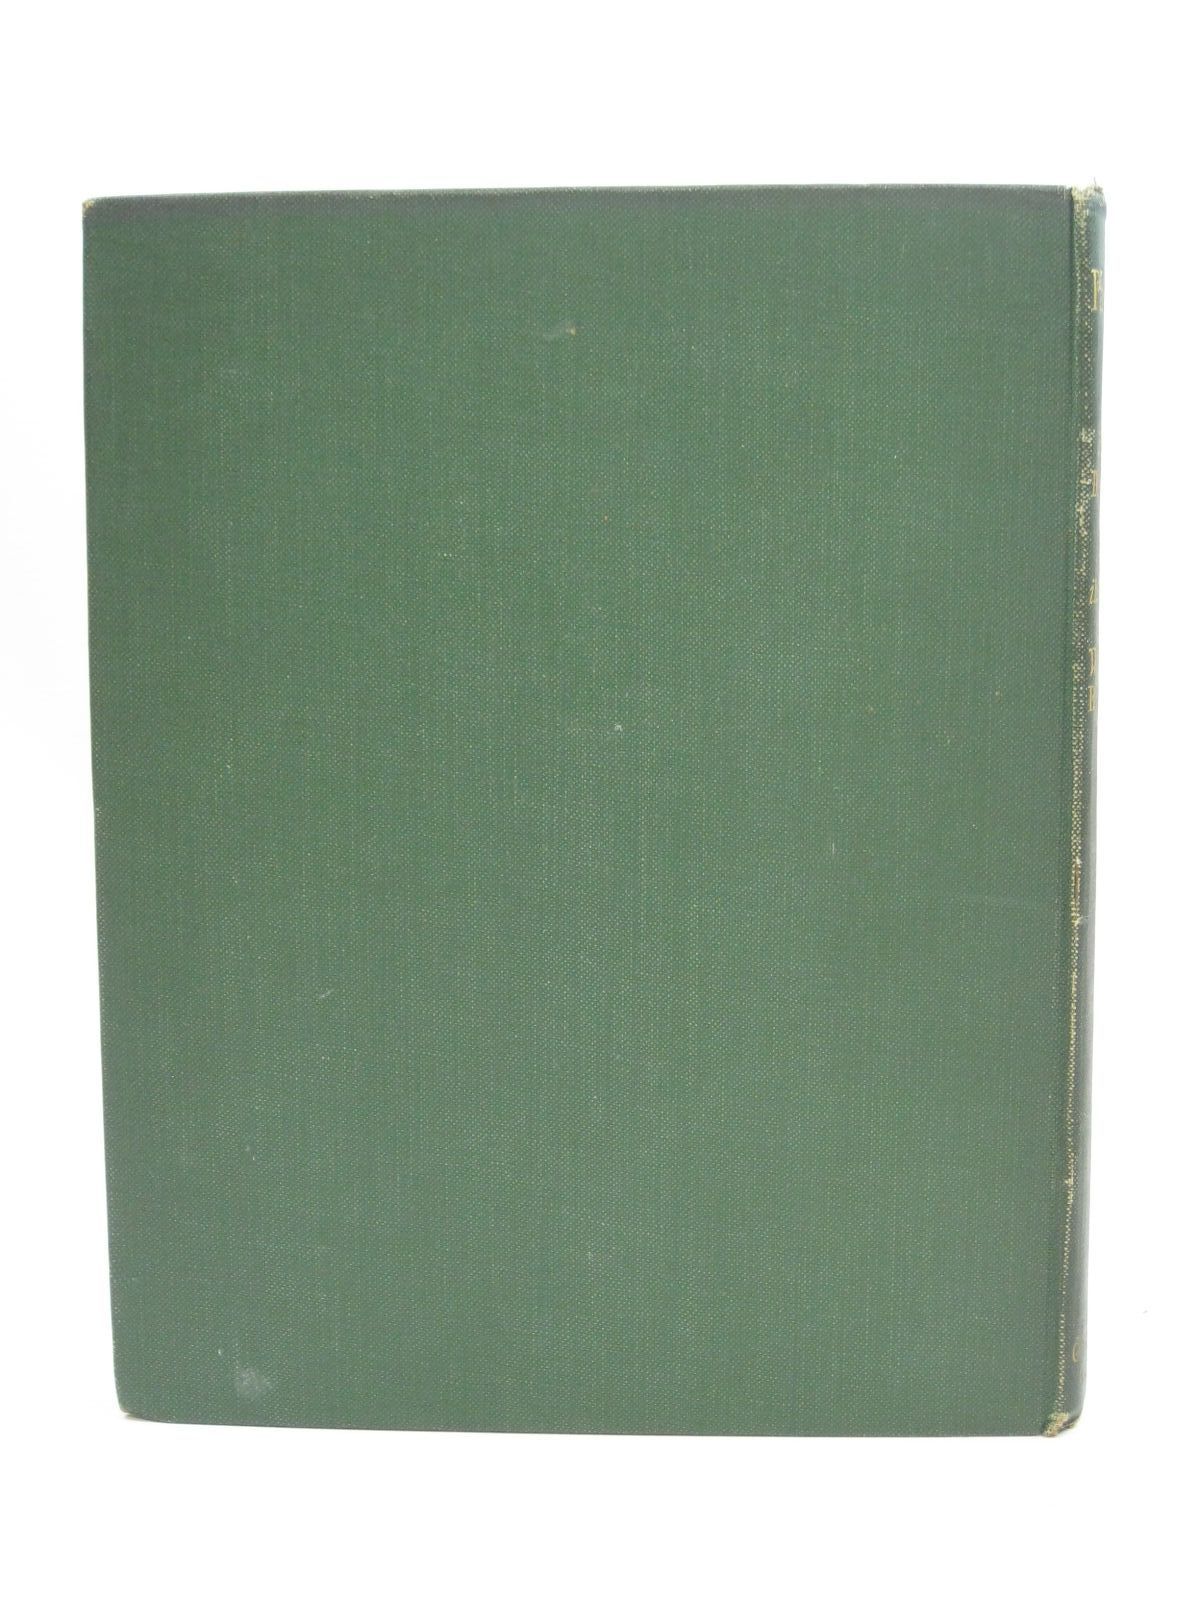 Photo of PEACOCK PIE - A BOOK OF RHYMES written by De La Mare, Walter illustrated by Robinson, W. Heath published by Constable and Company Ltd. (STOCK CODE: 1405775)  for sale by Stella & Rose's Books